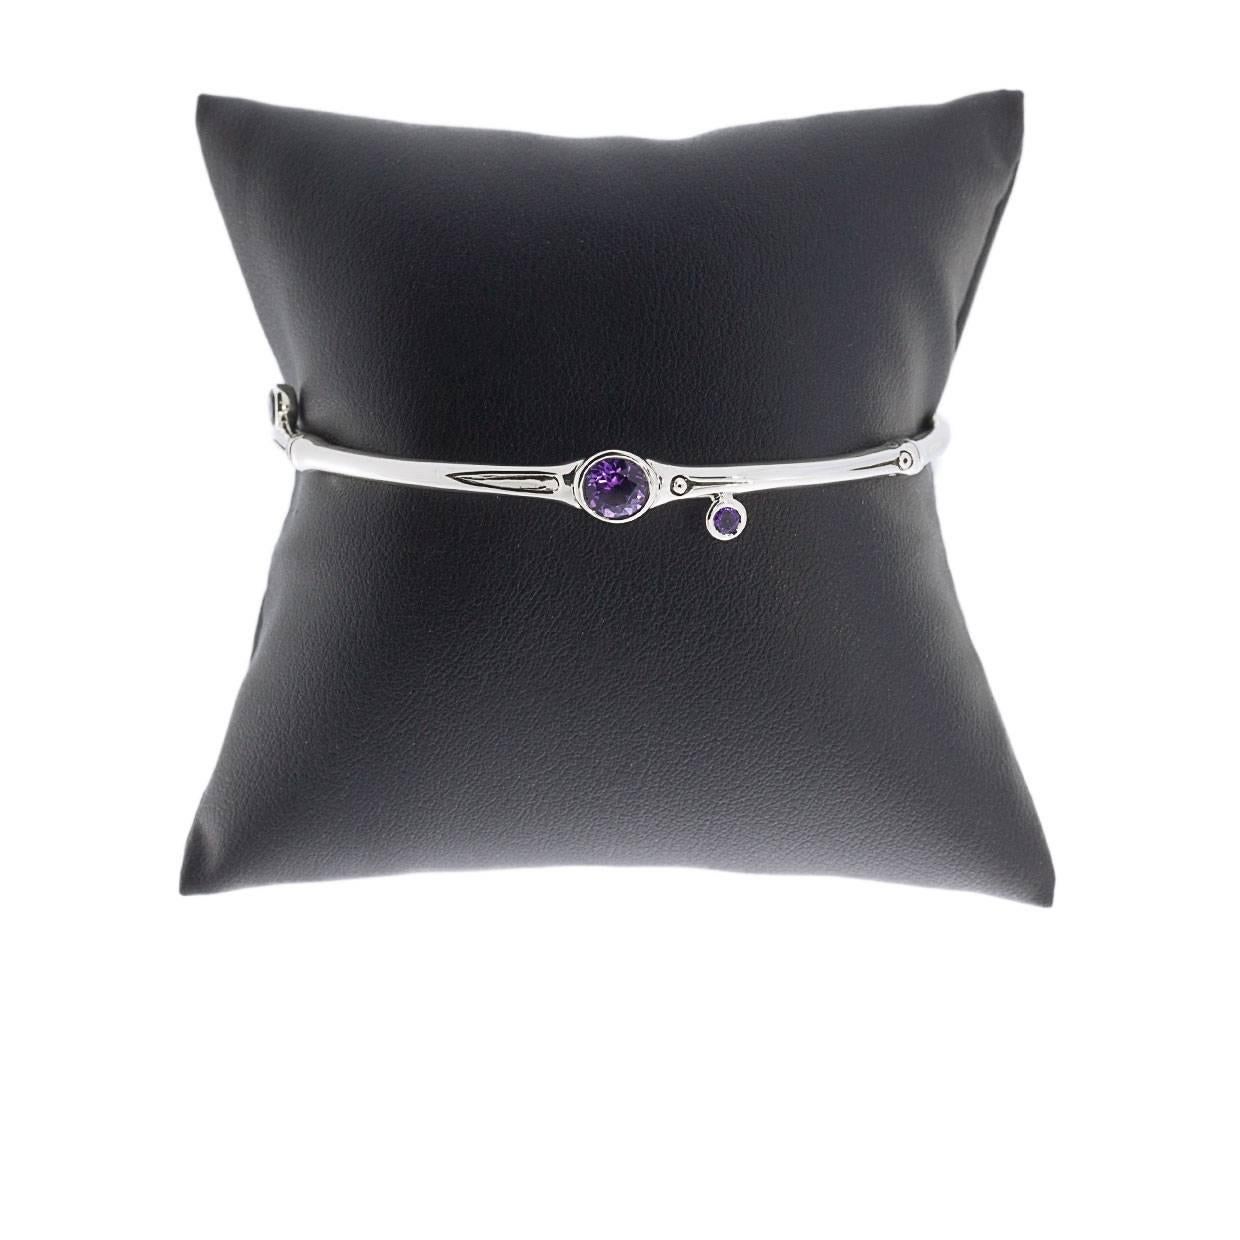 Each piece of John Hardy jewelry has been crafted in Bali since 1975. John Hardy is dedicated to creating timeless one-of-a-kind pieces that are brilliantly alive.

This sterling silver amethyst bangle bracelet is from John Hardy's Bamboo